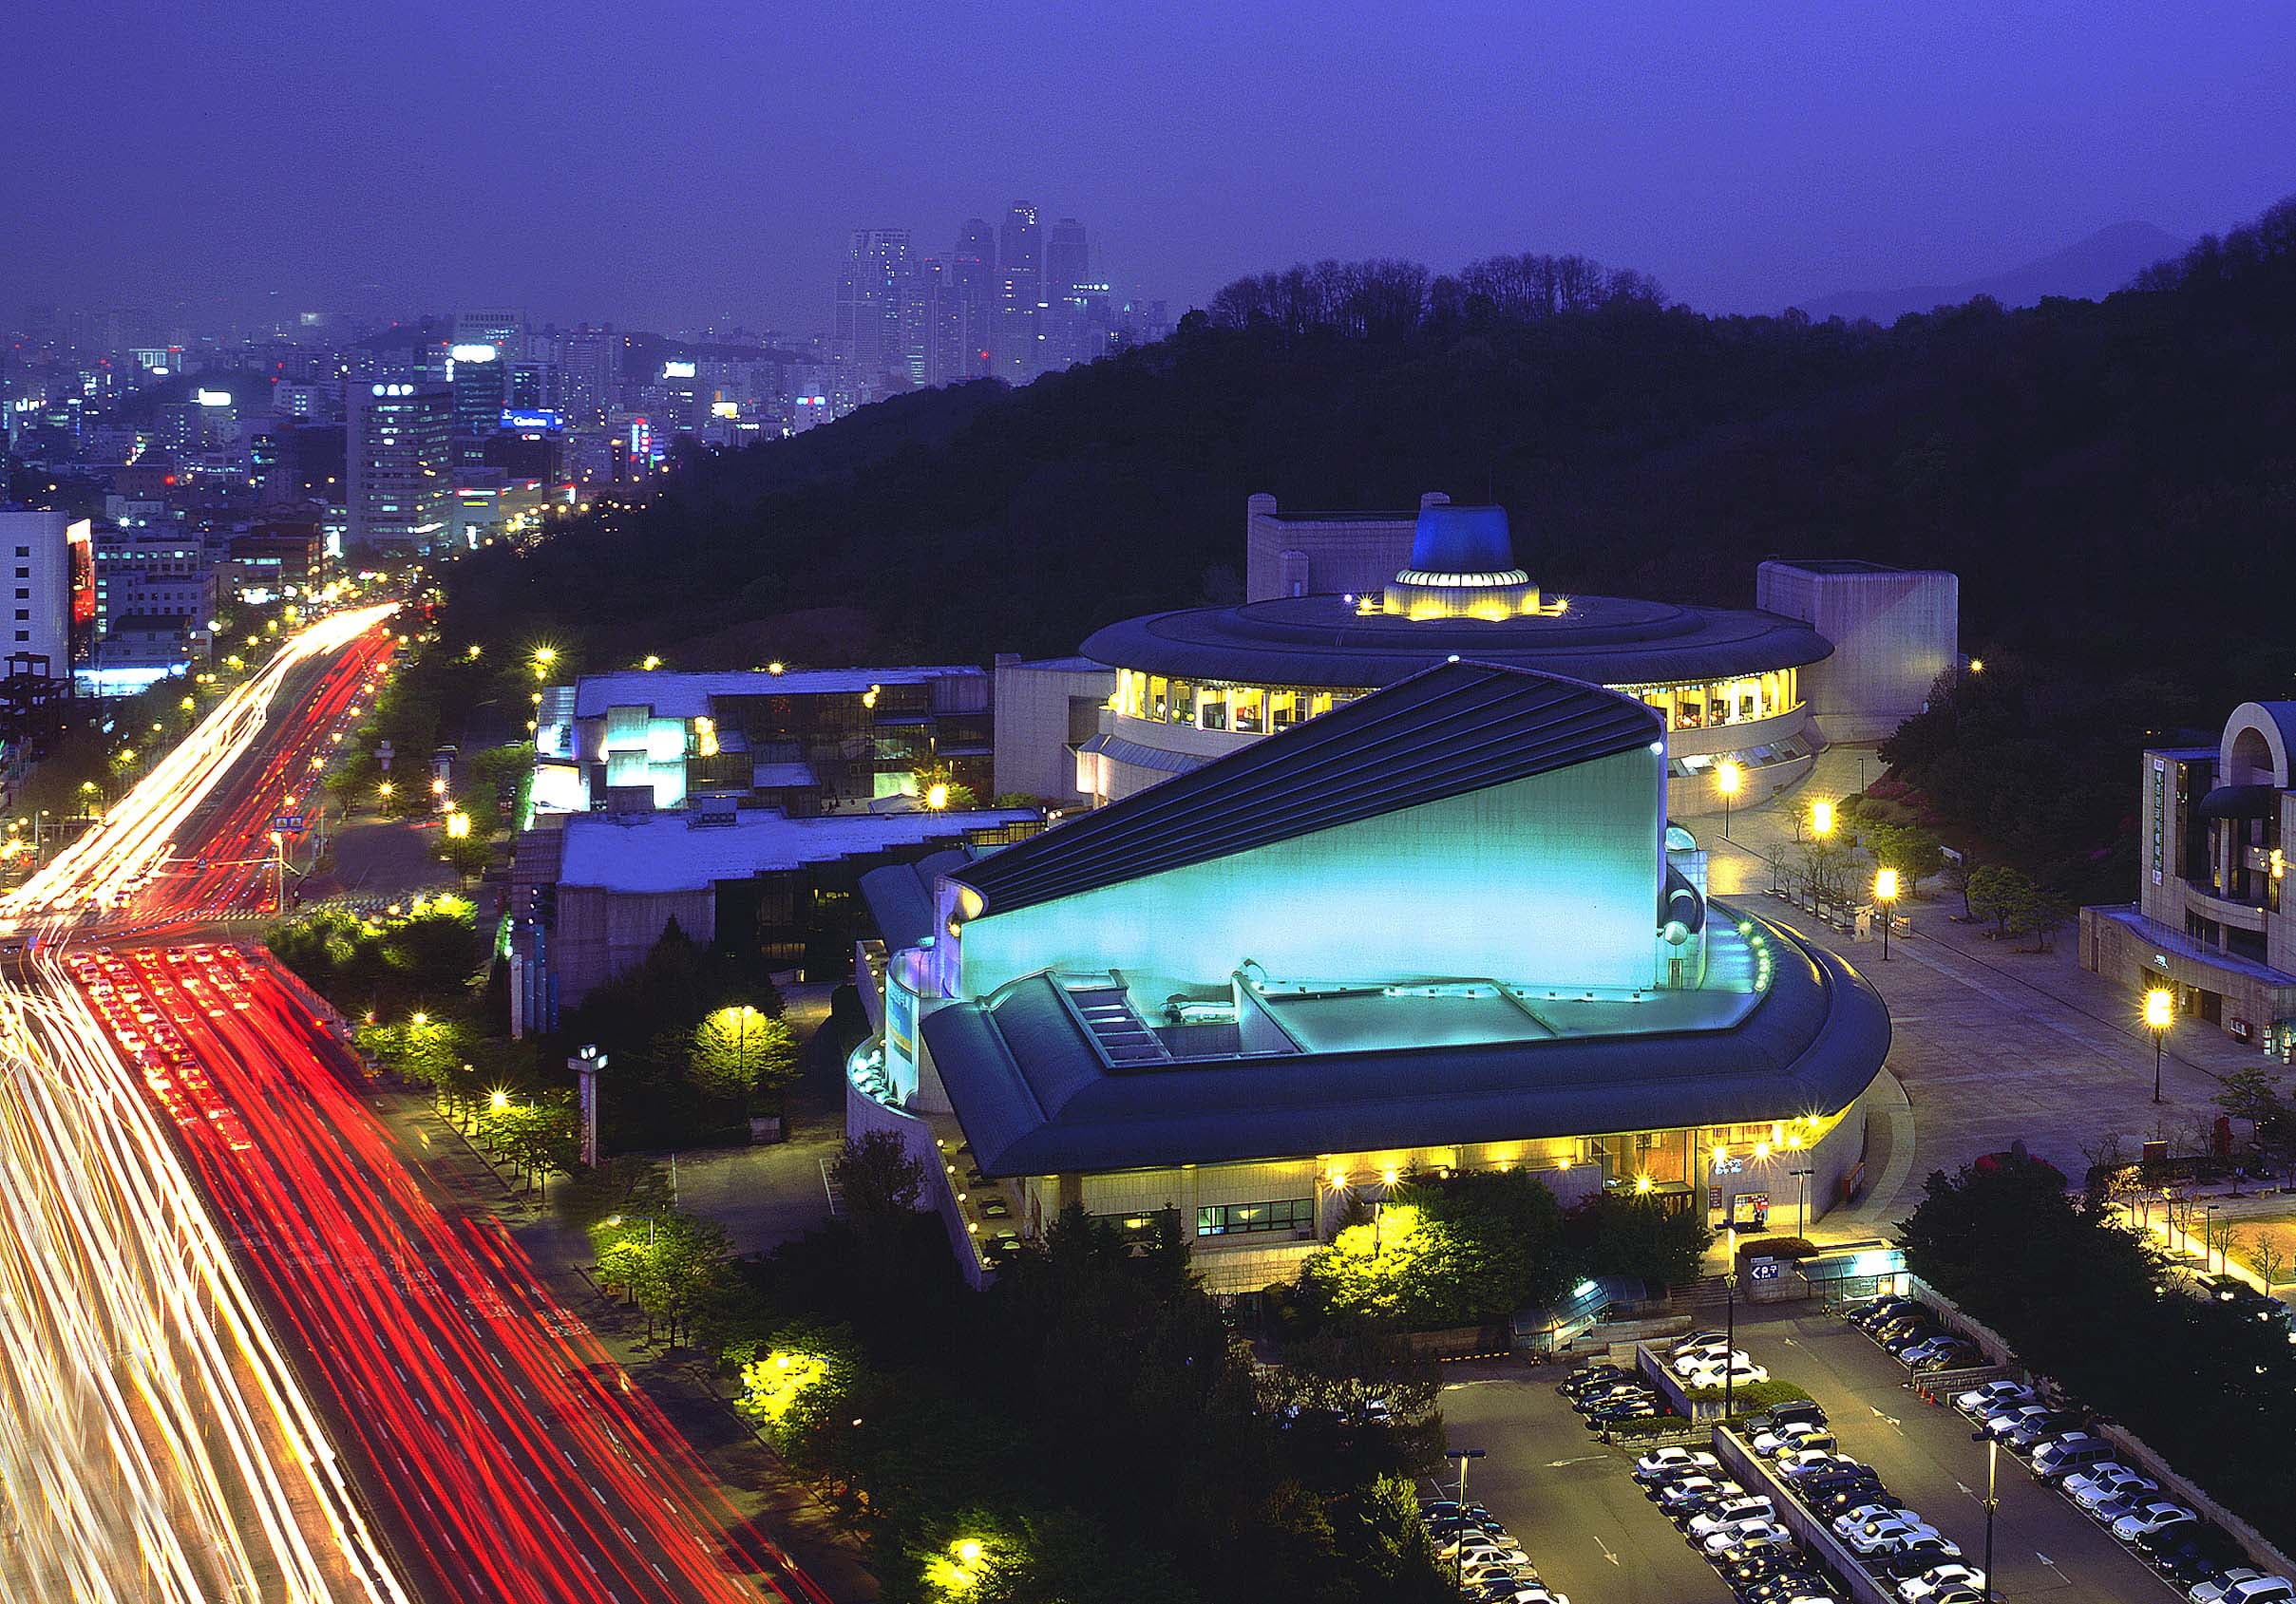 Music Hall, Seoul Arts Center2 : Exterior night view of the Music Hall at Seoul Arts Center with blue lights on the front of the building and car lights on the road